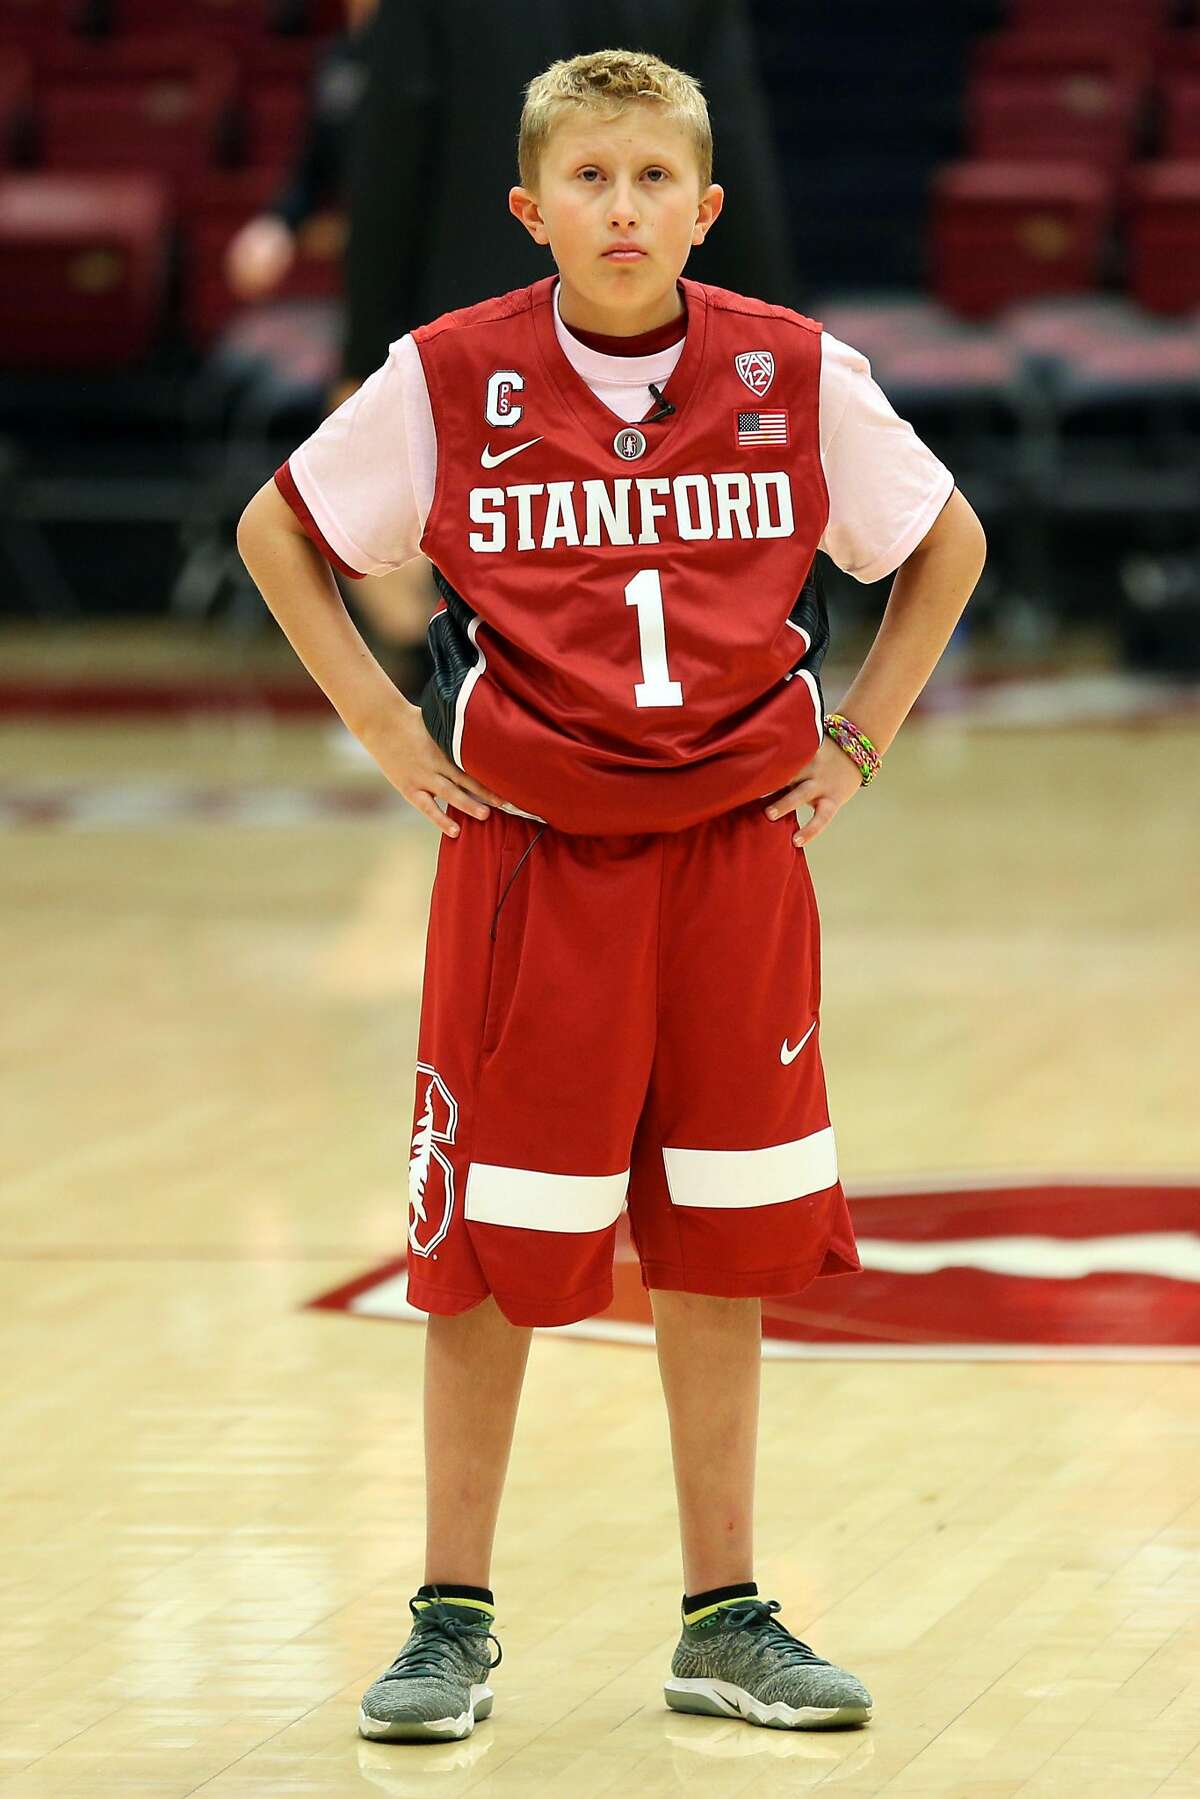 Ty Whisler, 11, helps the Stanford Cardinal warm up before a basketball game between the Stanford Cardinal and Washington Huskies at Maples Pavilion, Thursday, Feb. 22, 2018, in Stanford, Calif. The Cardinal won 94-78.